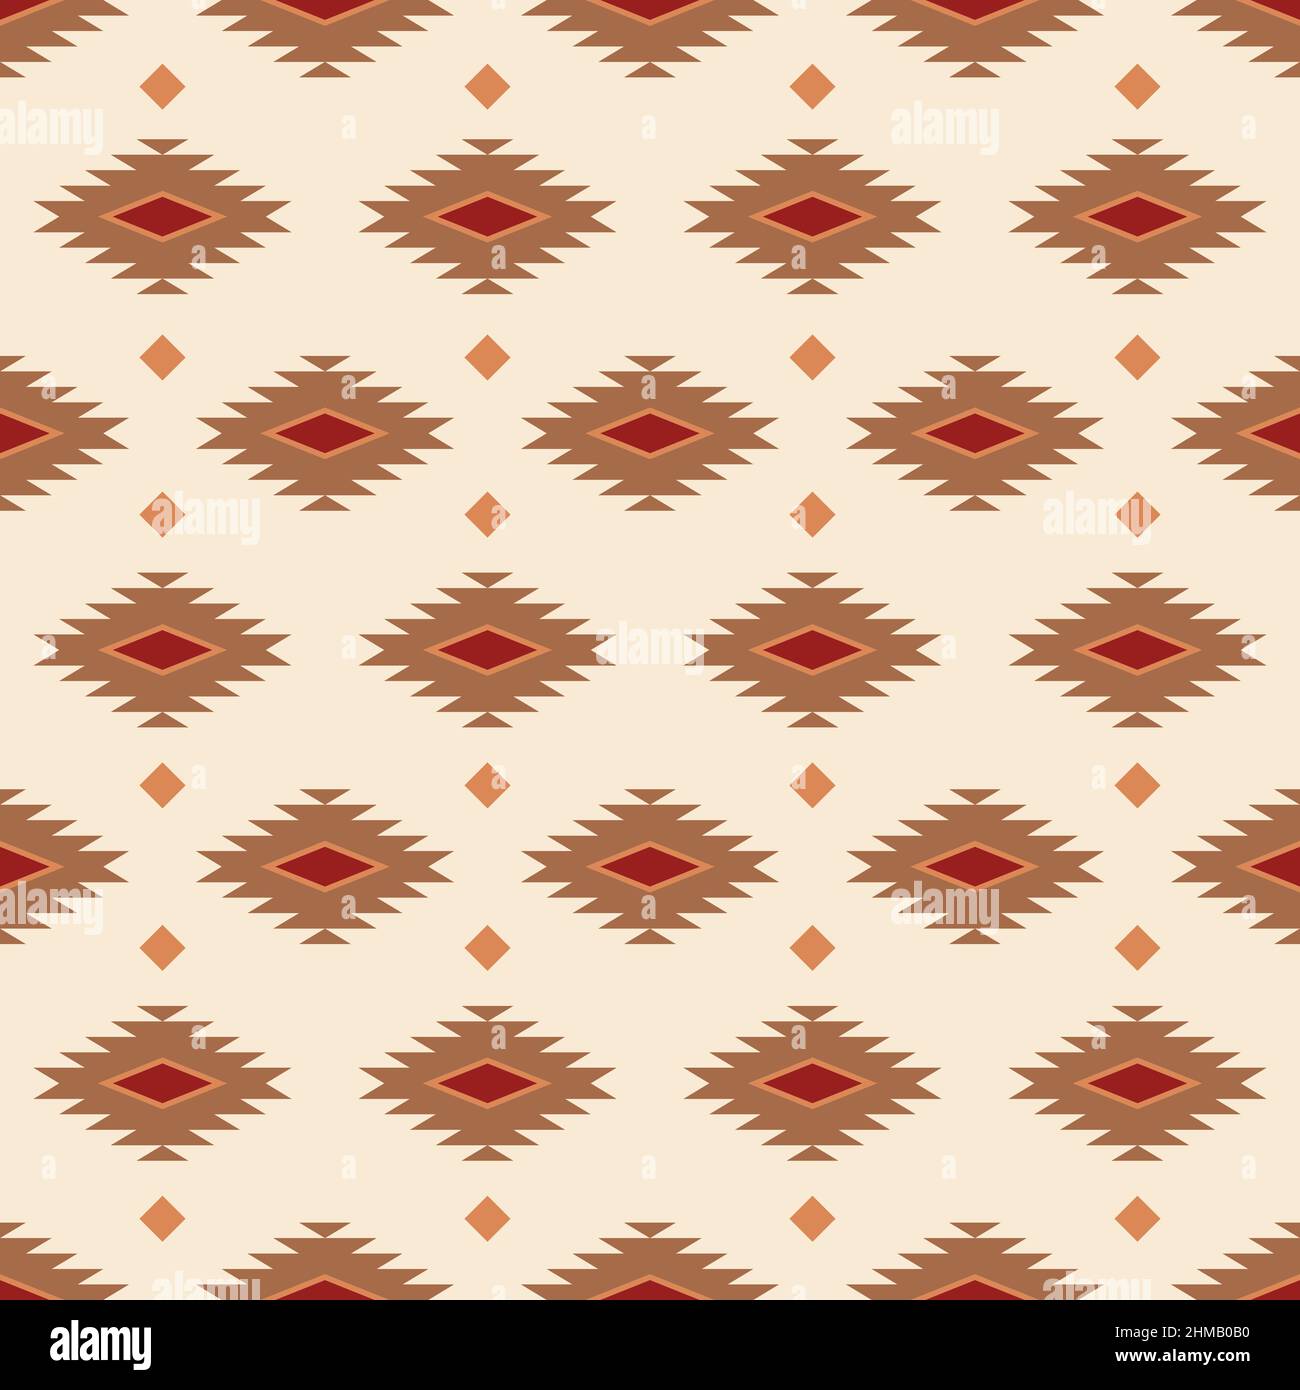 Western style design in a seamless repeat pattern - Vector Illustration Stock Vector